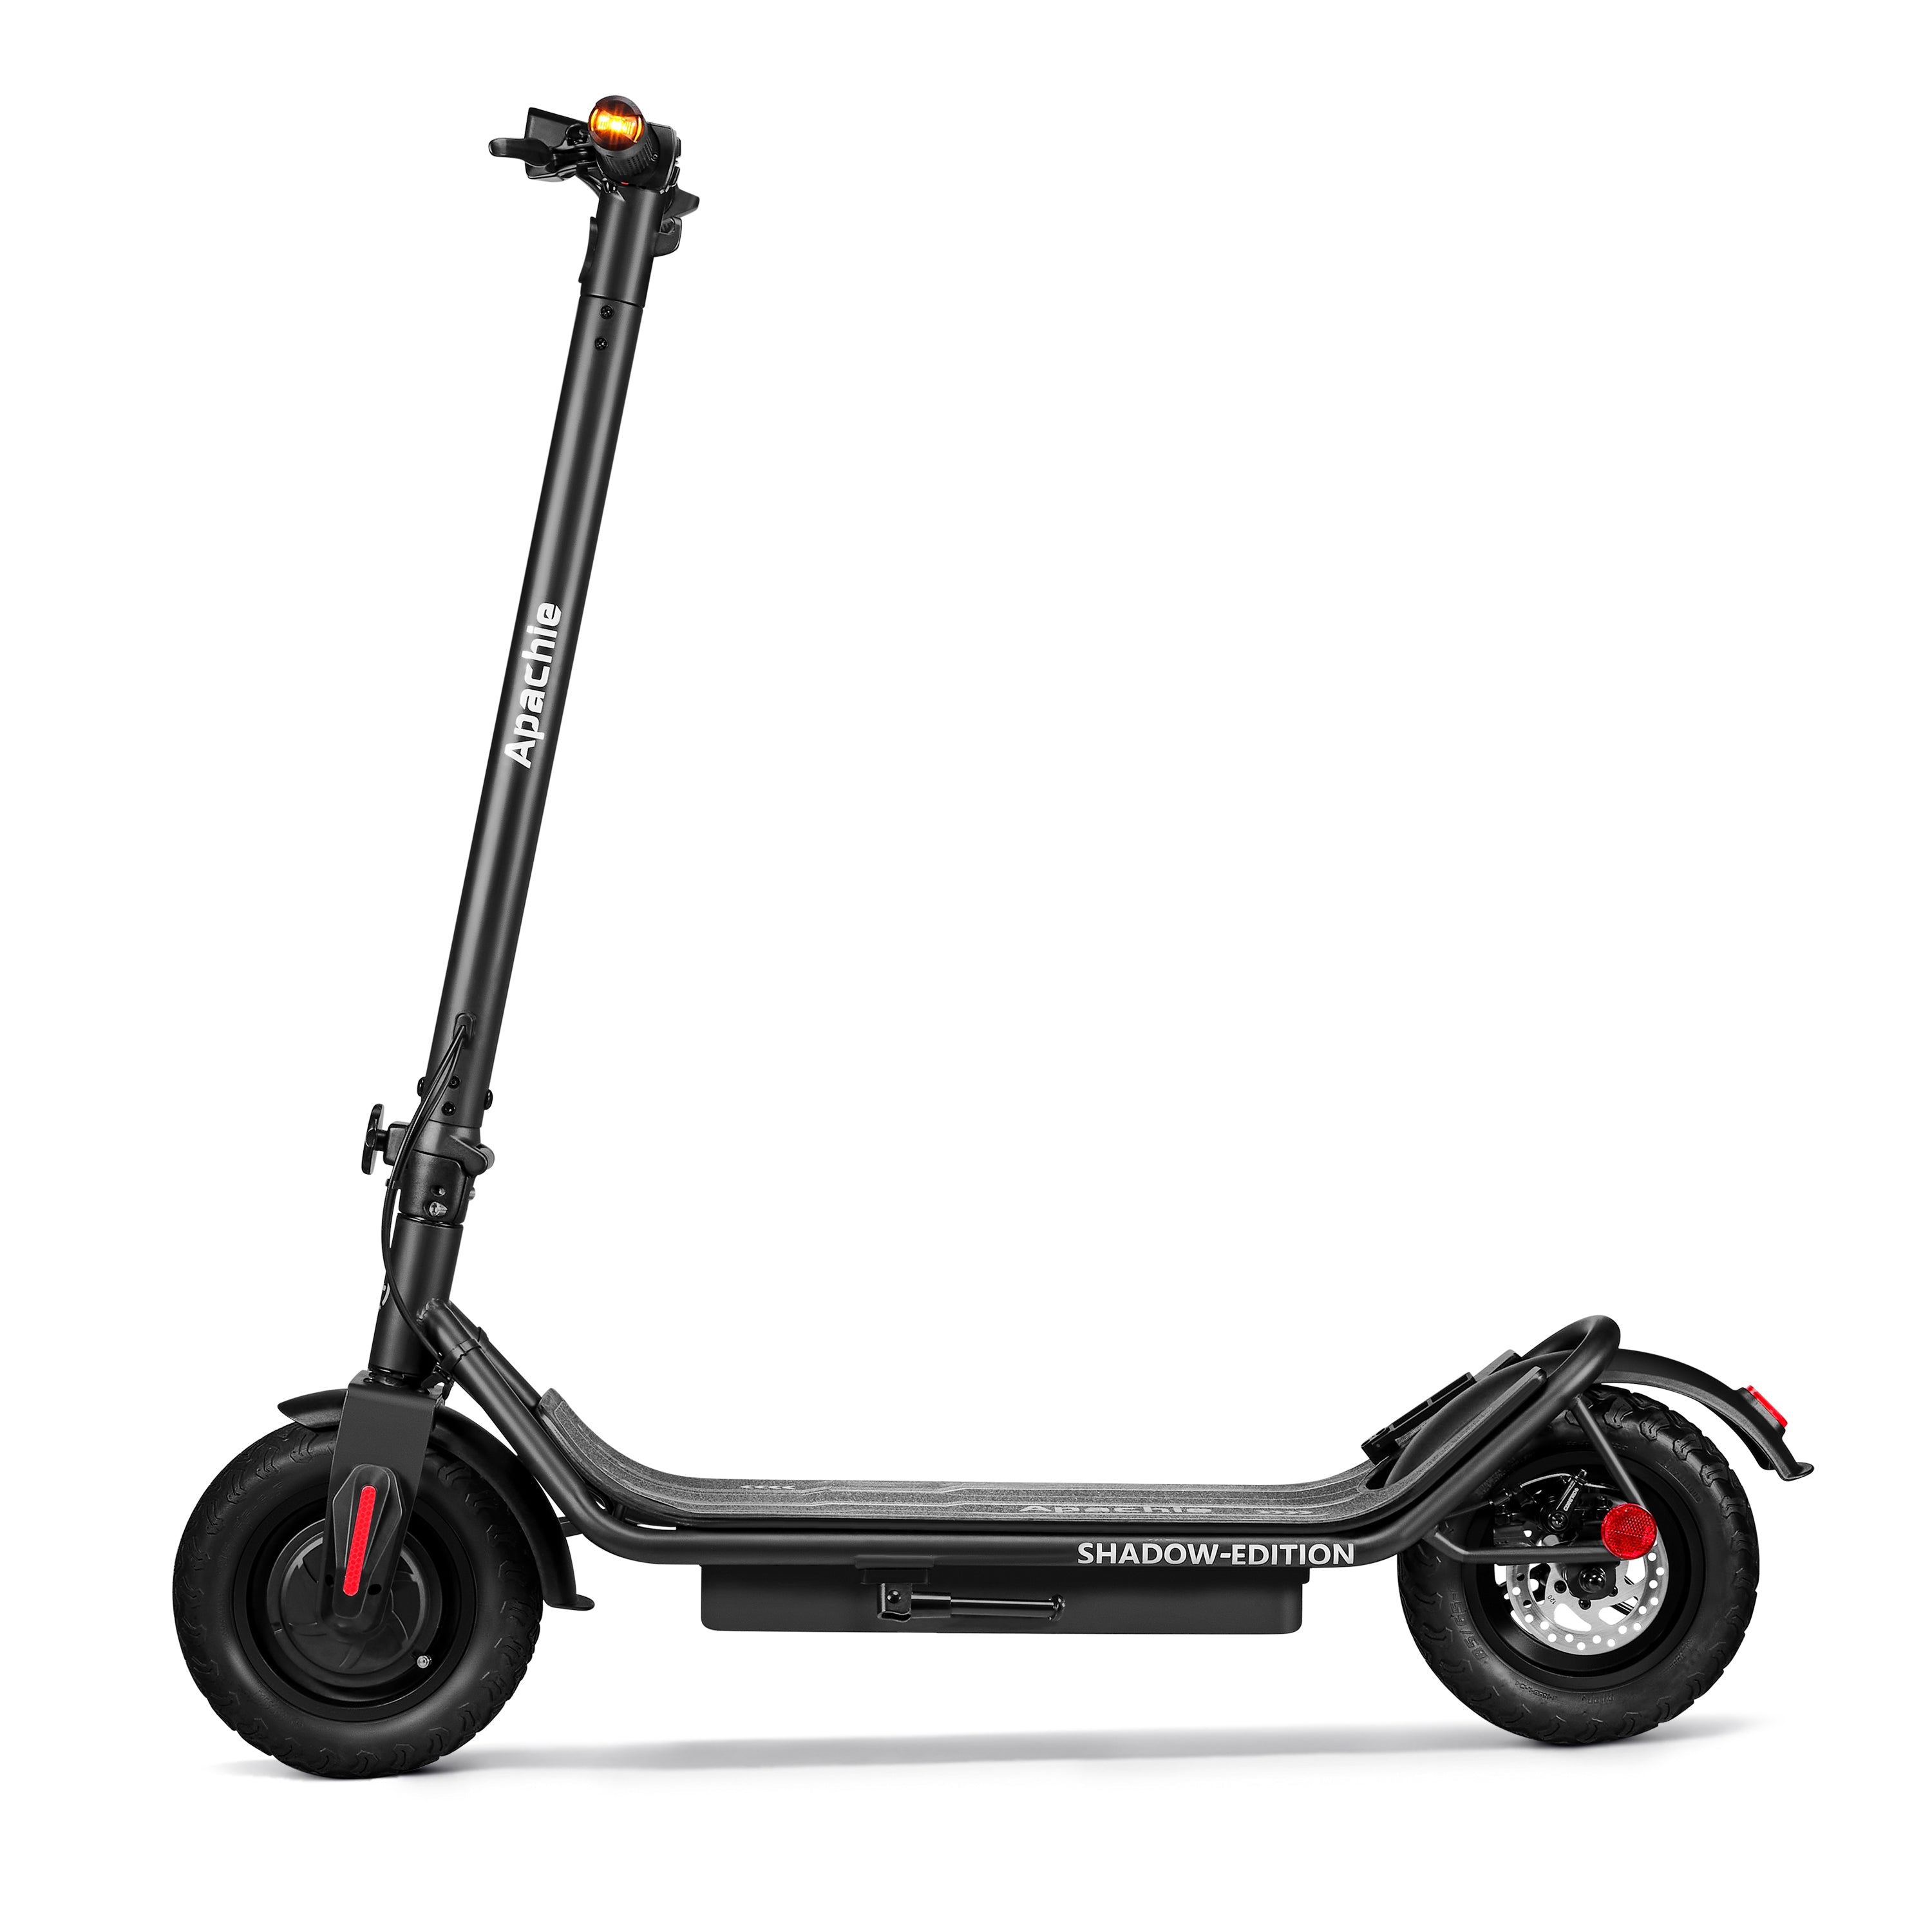 Apachie Shadow Edition 500W Electric Scooter Refurbished